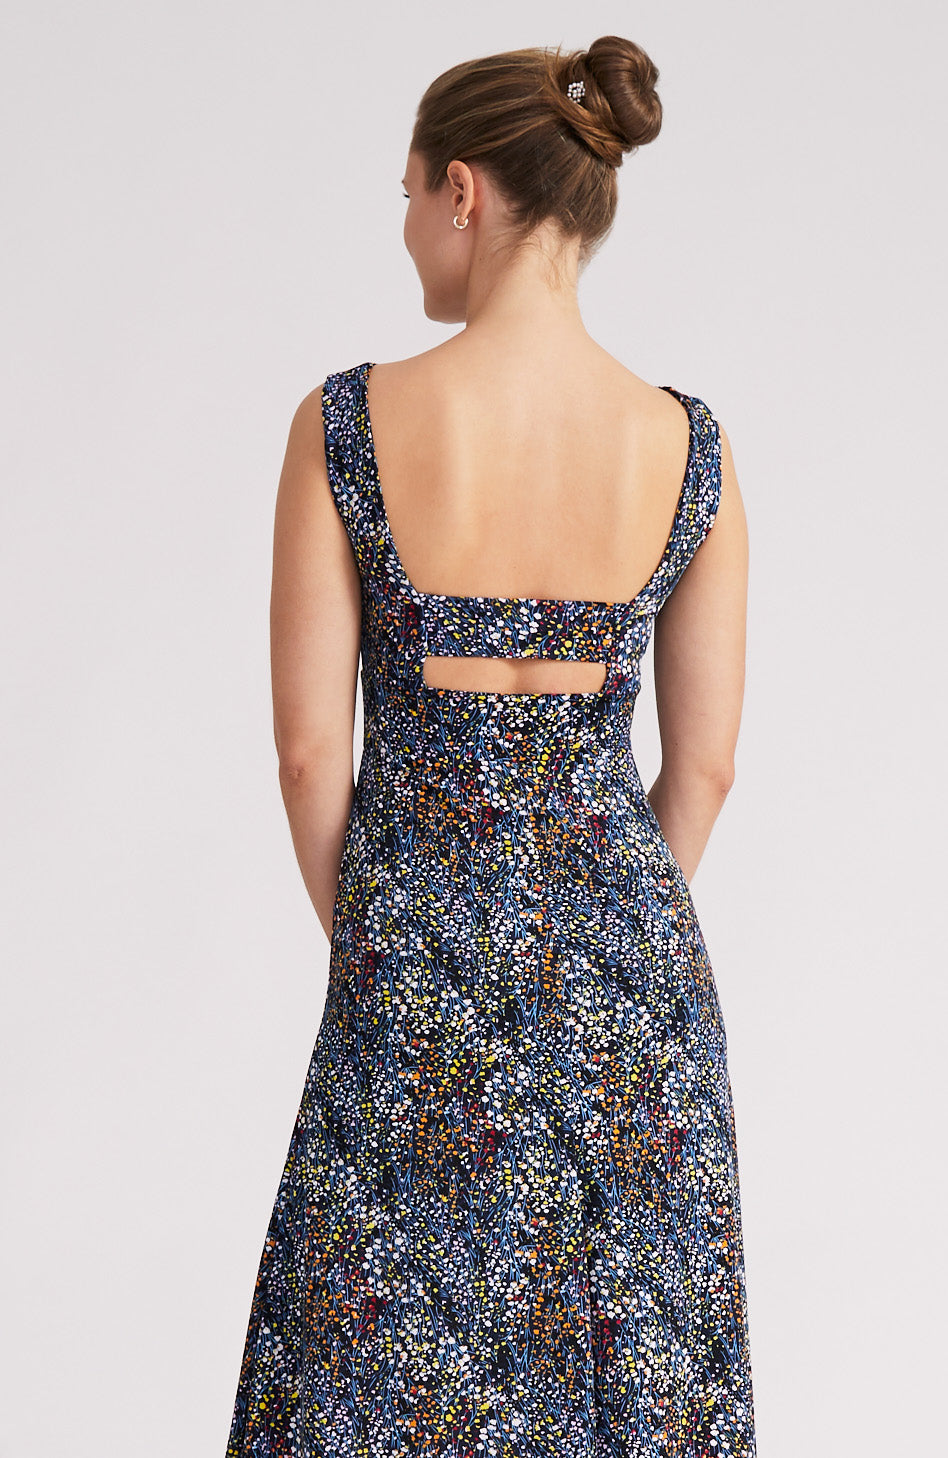 floral tango dance dress with open back